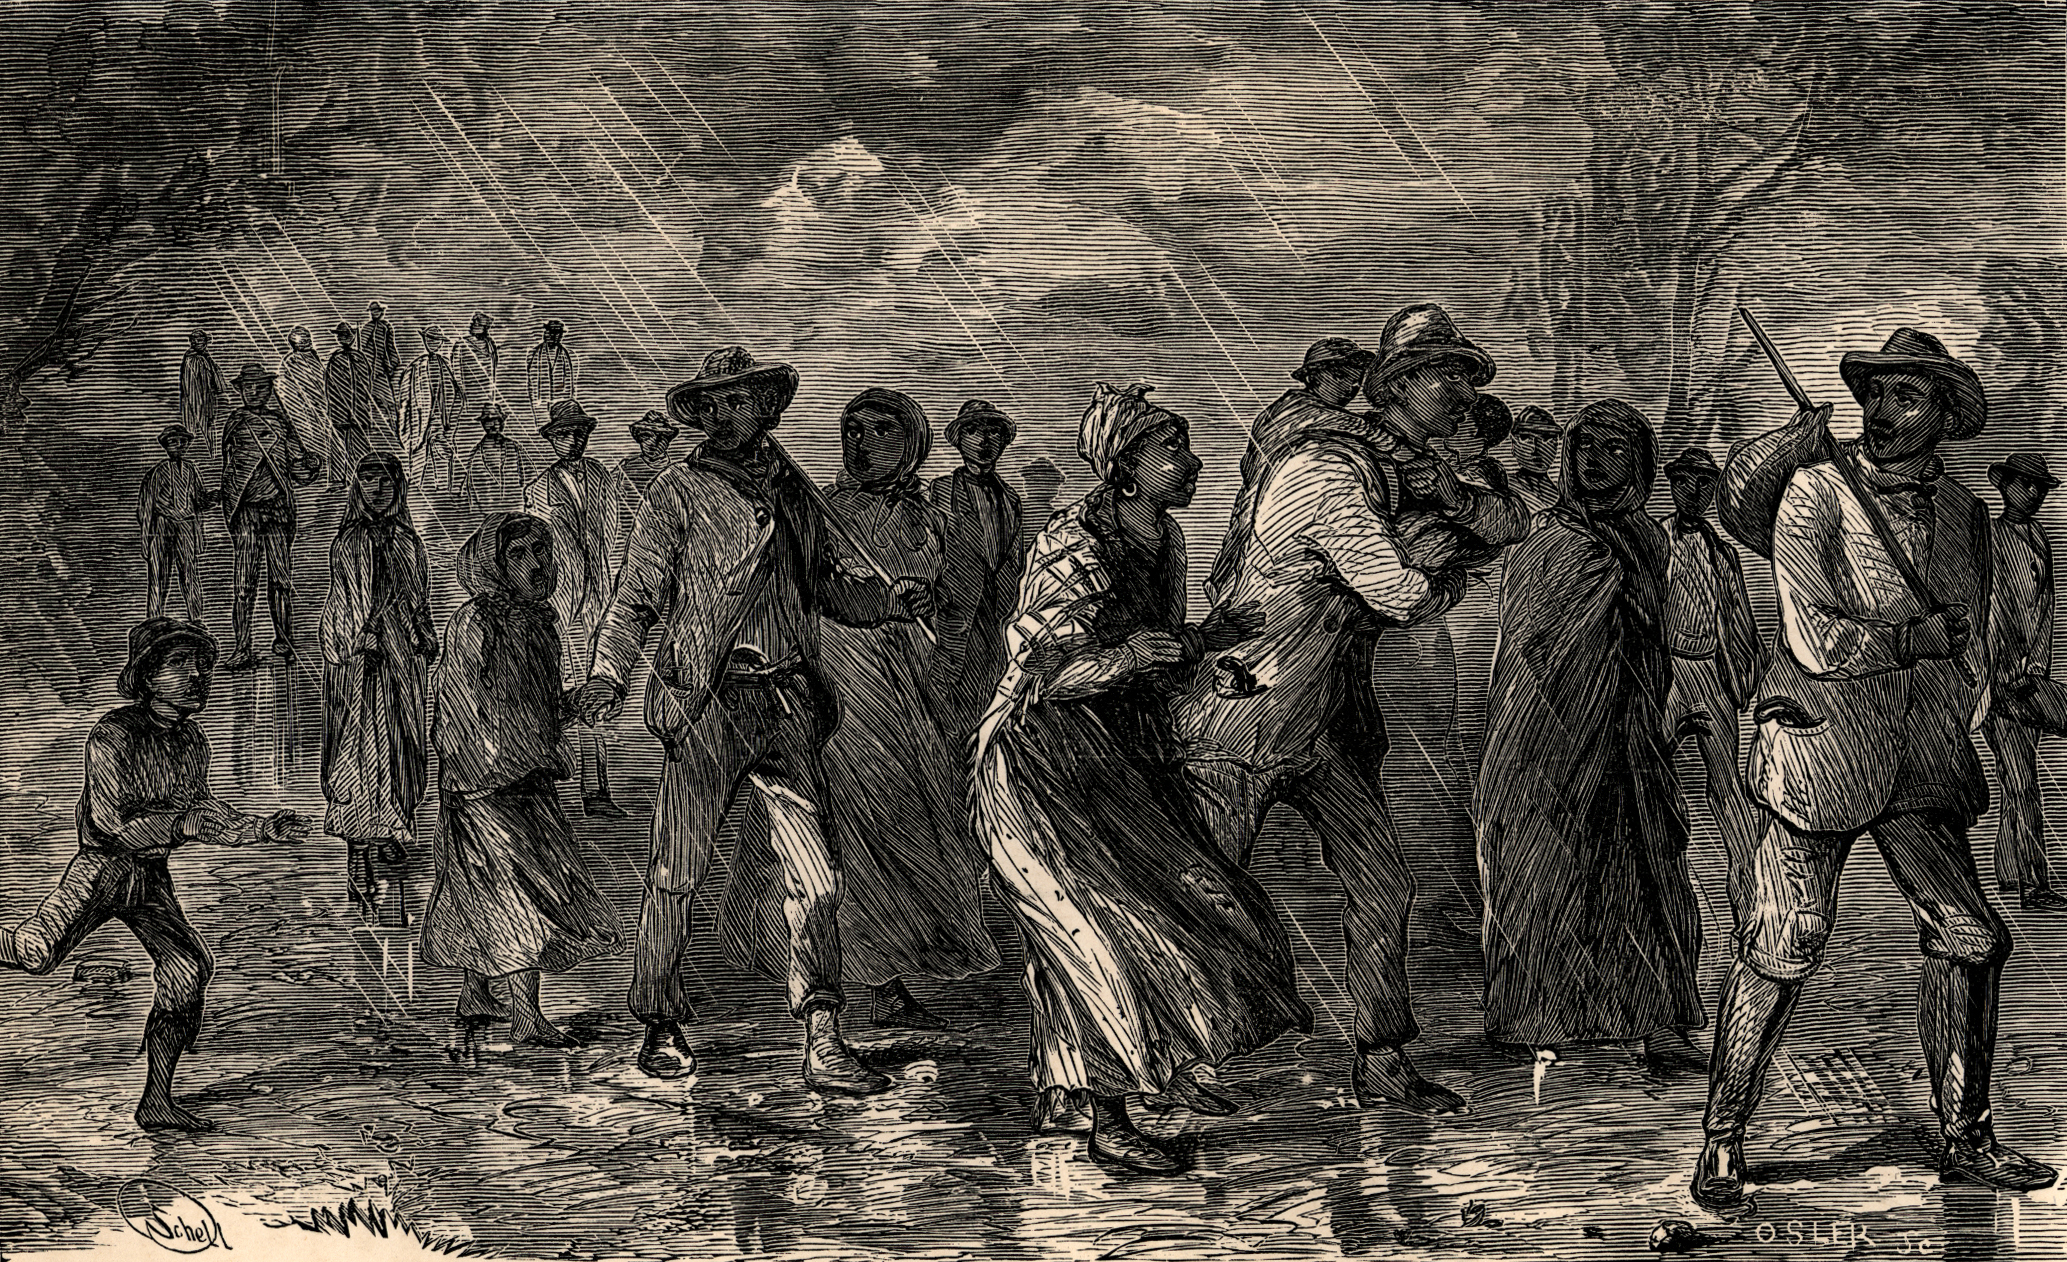 Engraving showing a group of 28 people who escaped slavery in 1857.